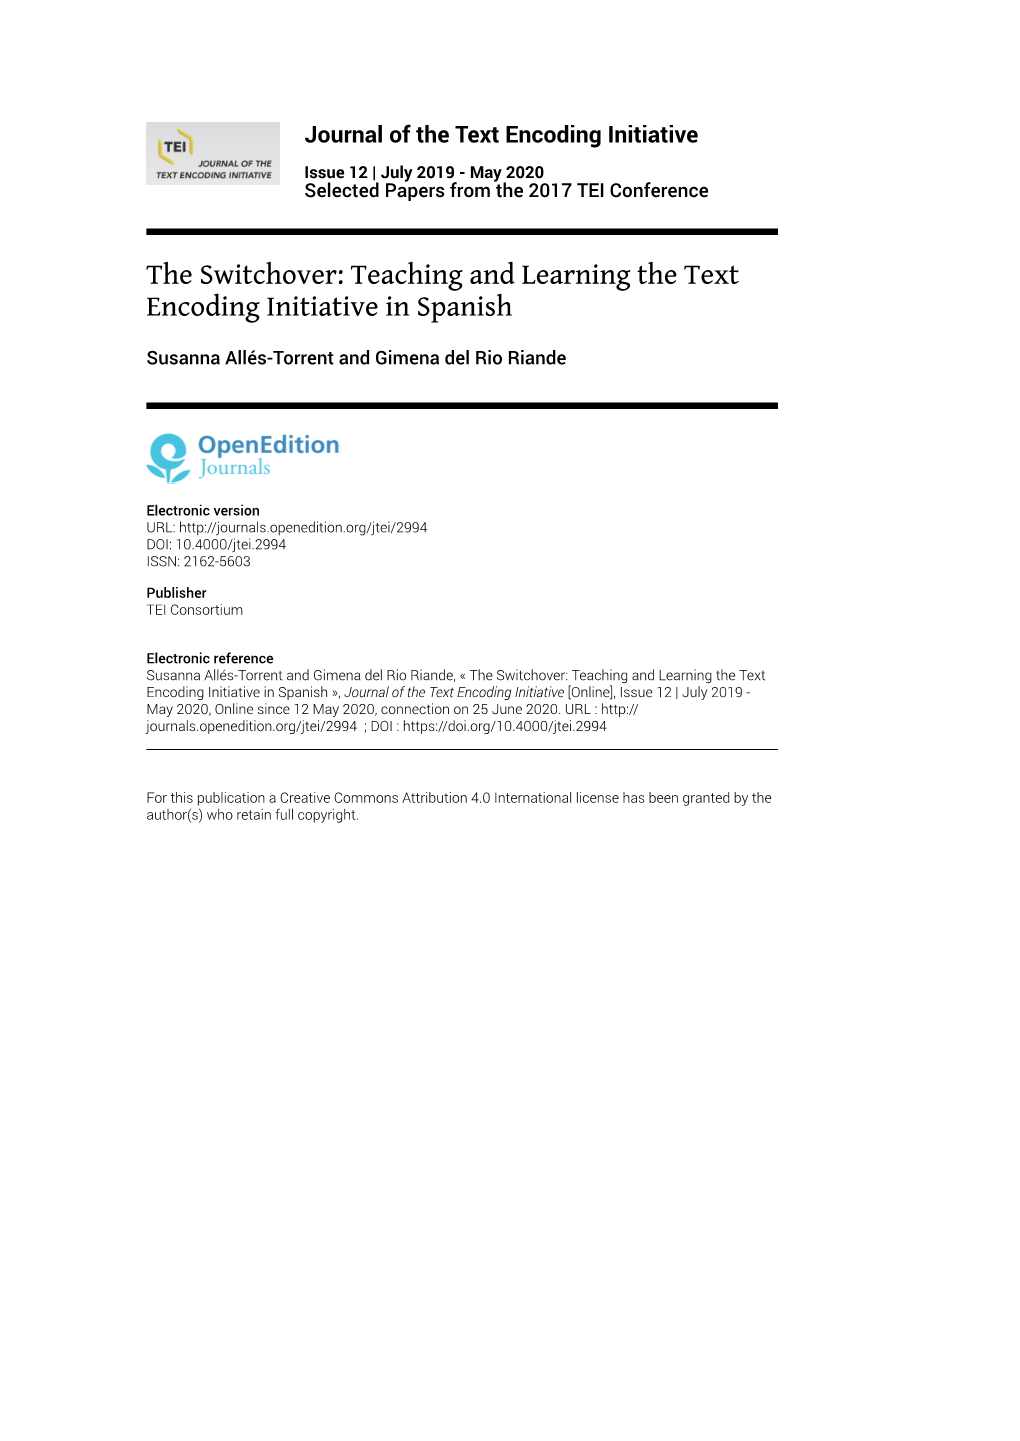 The Switchover: Teaching and Learning the Text Encoding Initiative in Spanish